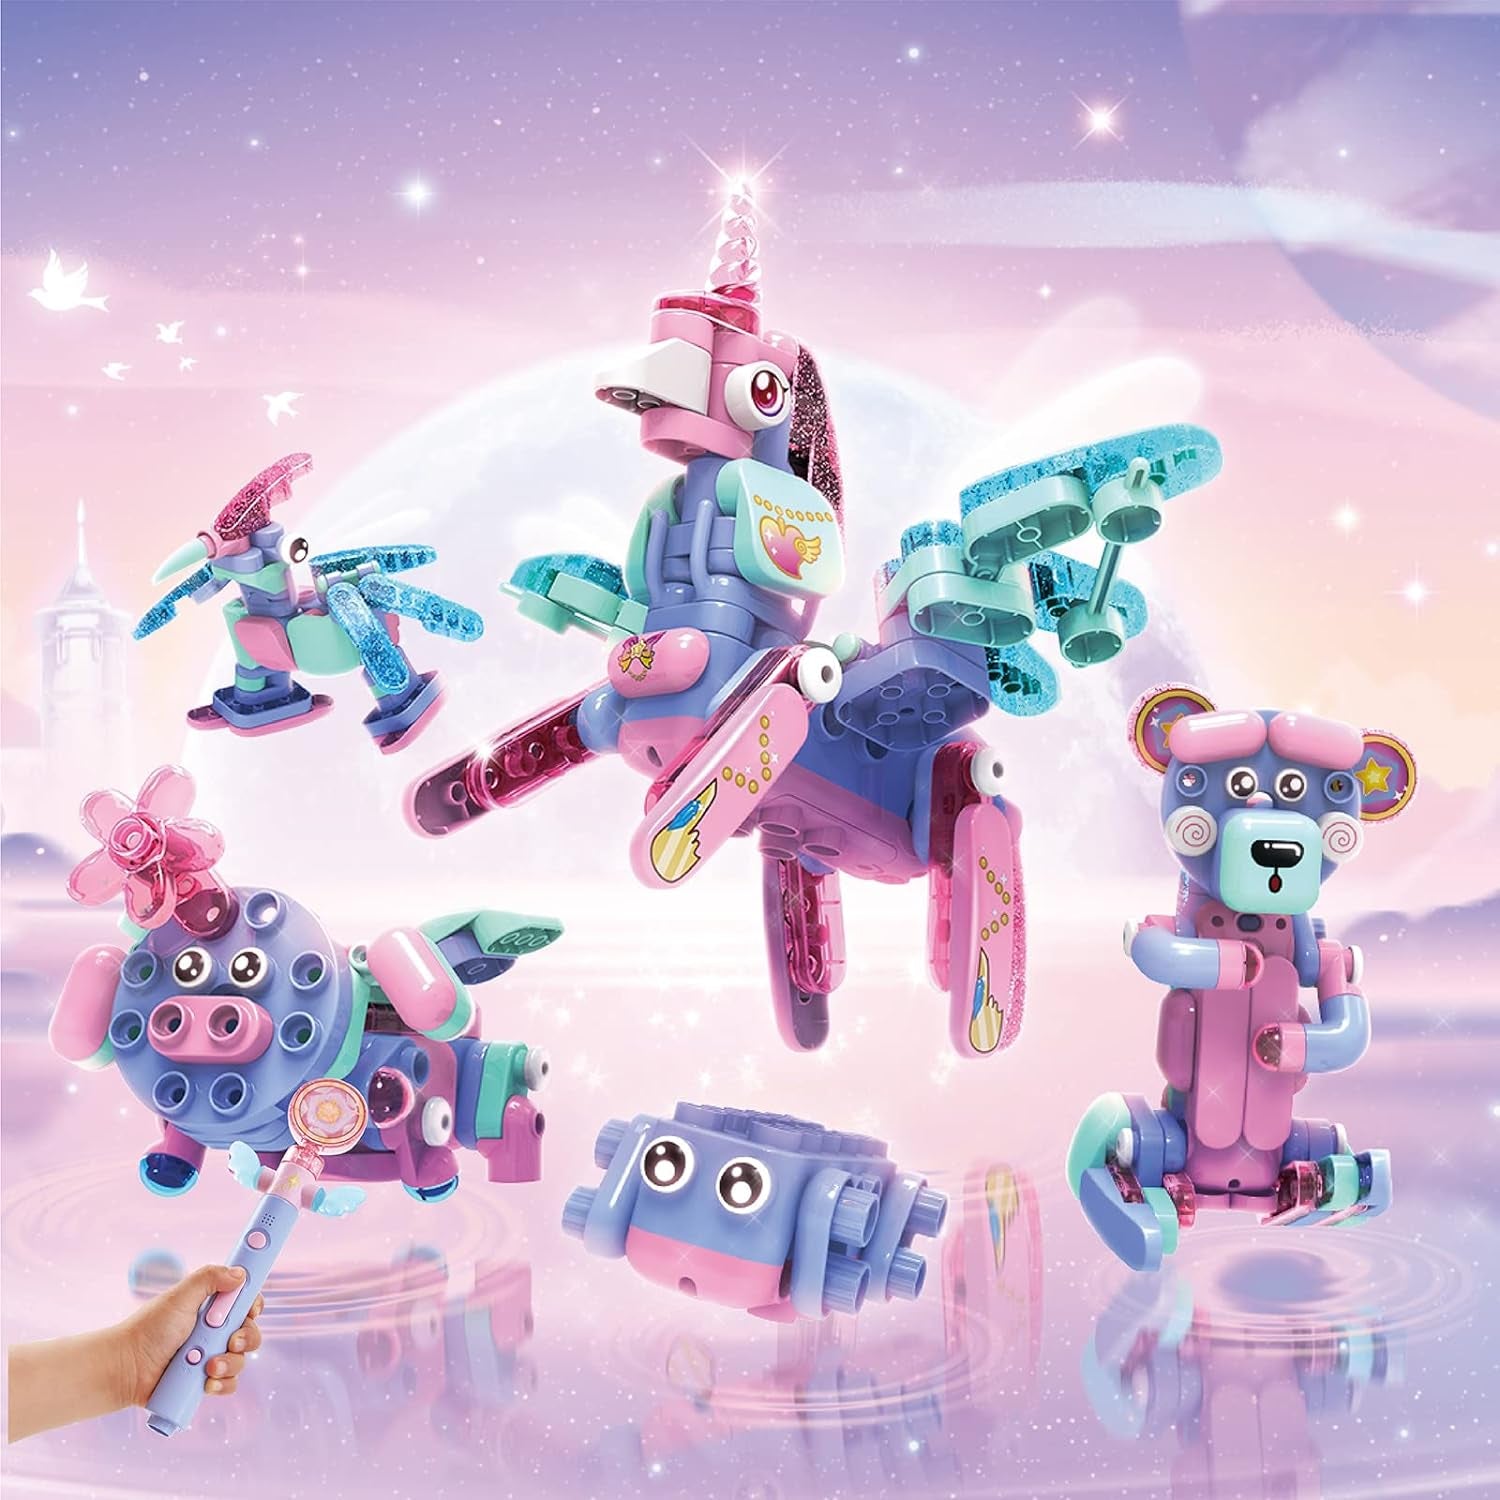 BOTZEES GO! Unicorn Toys, Unicorn Robots for Kids, Building & Electric Remote Control Toys, STEM Learning Toys for Kids Ages 3+, Girls Toys, with RC Magic Stick, App Based